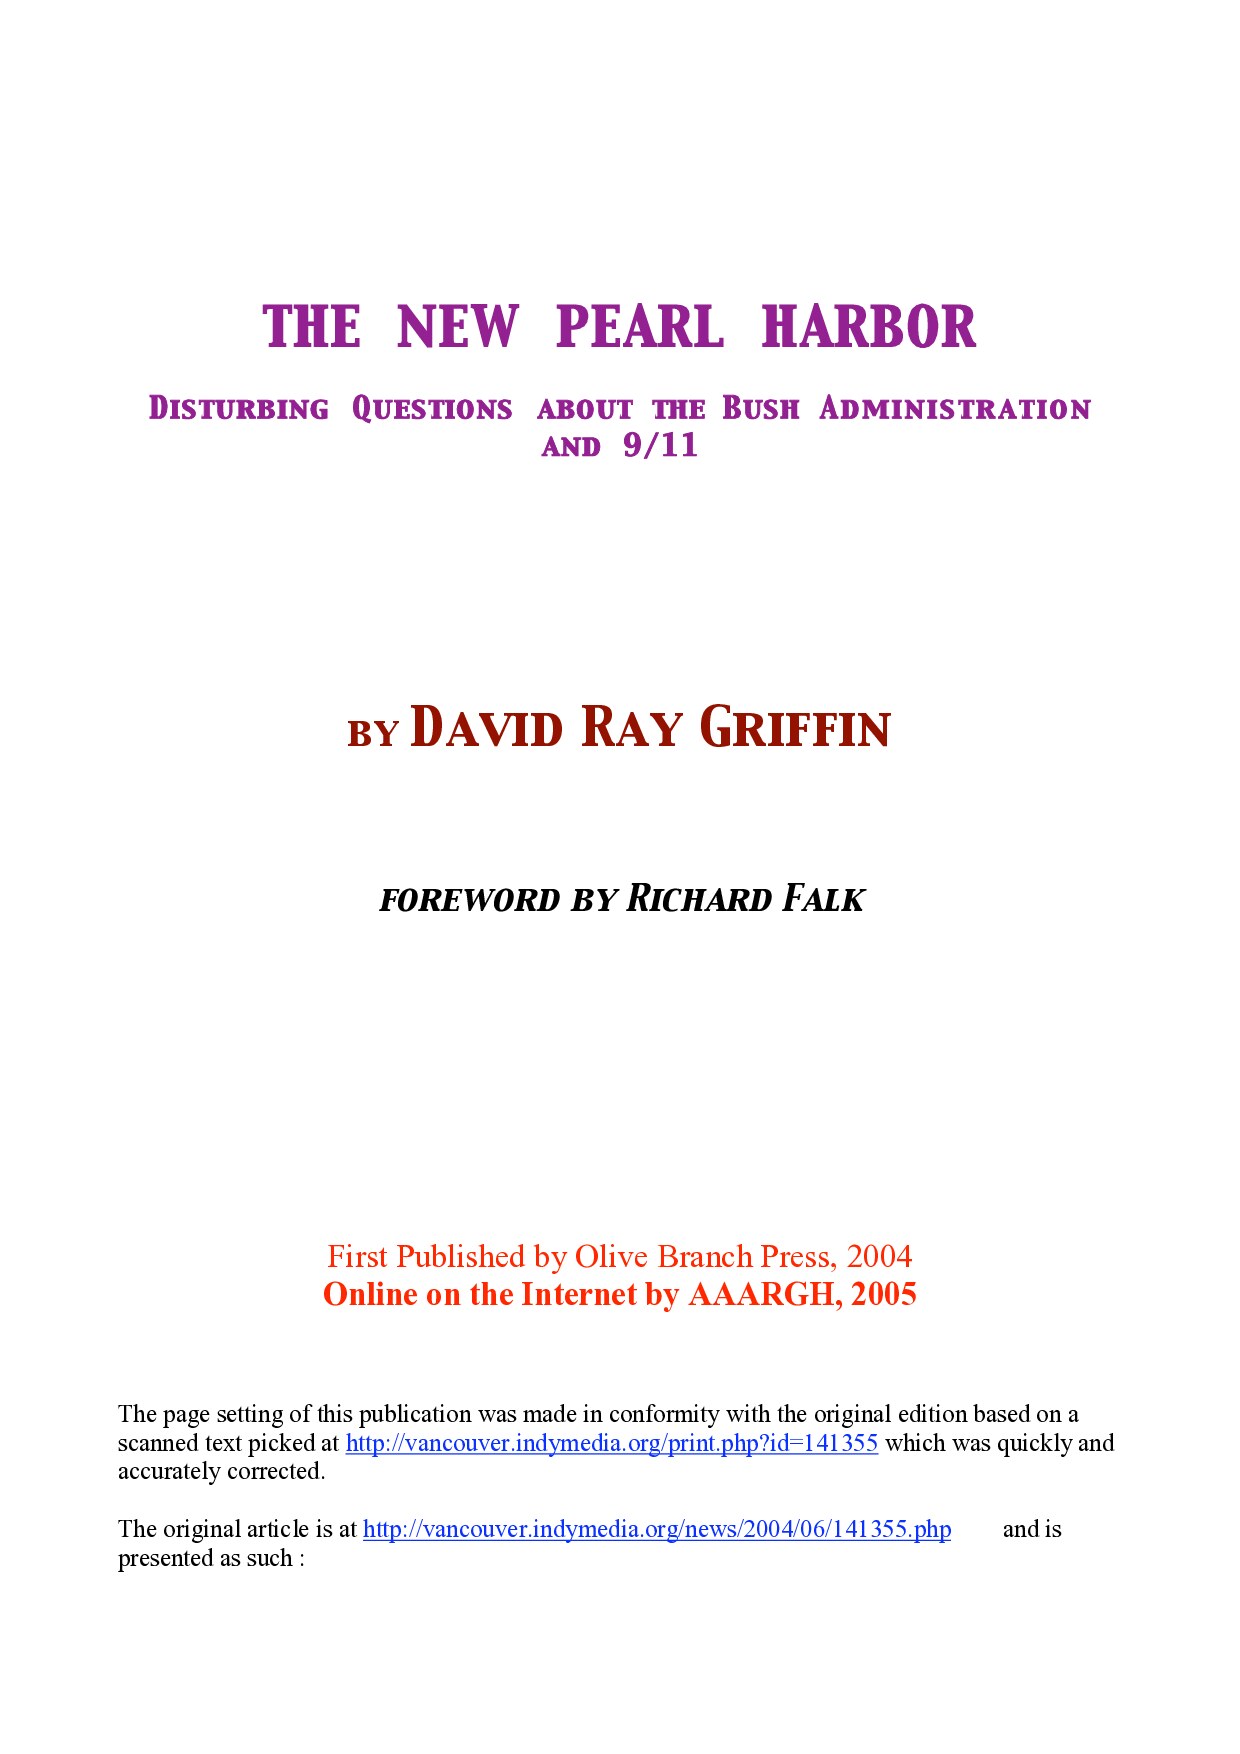 Griffin, David Ray; The New Pearl Harbor - Disturbing Questions About The Bush Administration And 911